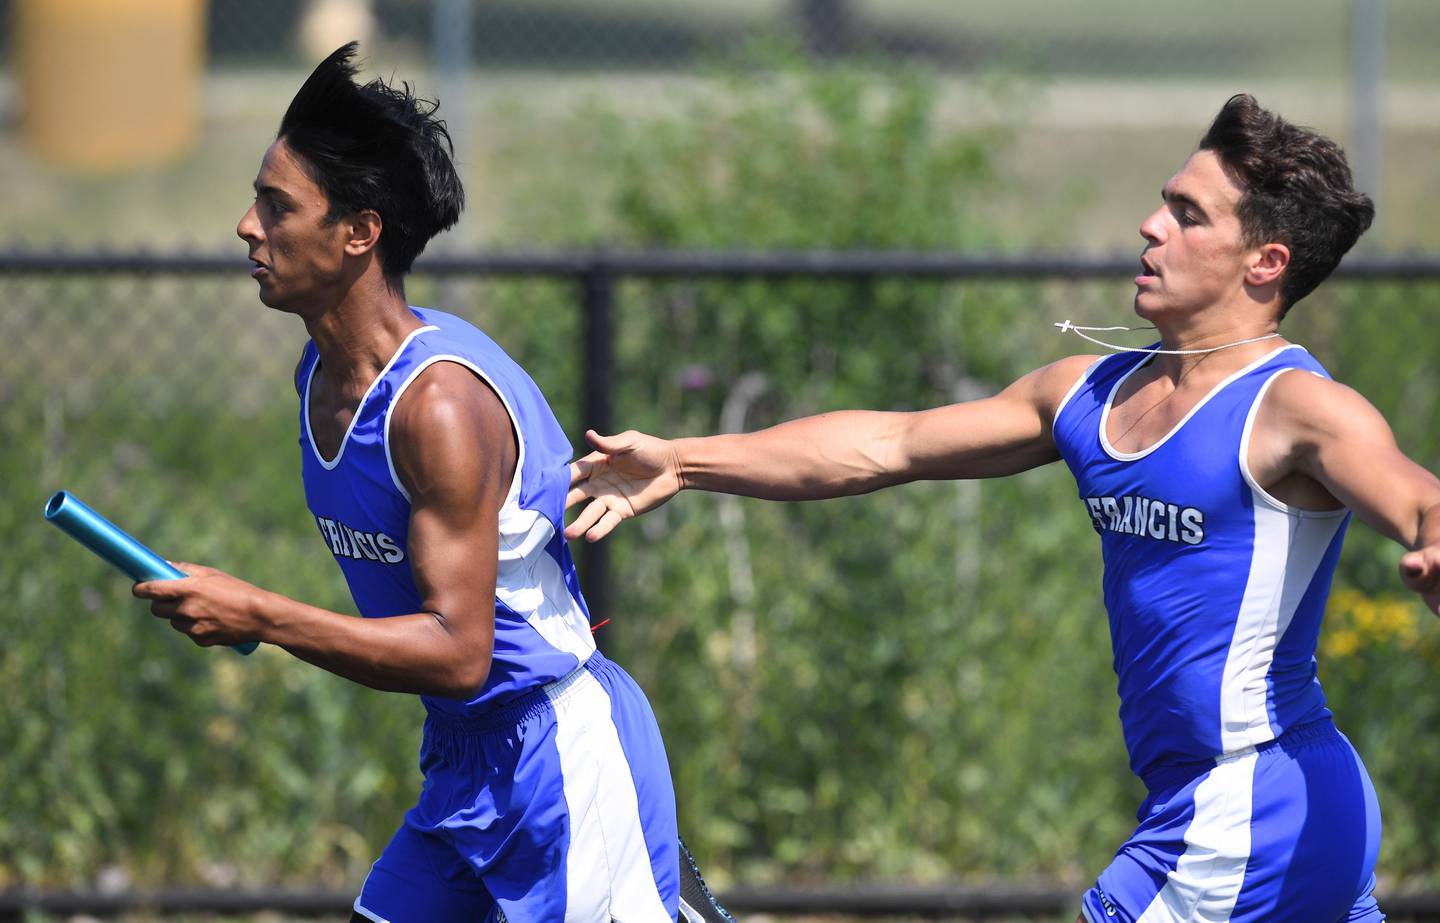 St. Francis lead off runner Gabe Siracusano gives a helping push to teammate Aakash Martin after handing the baton in the 4x100-meter relay at a Class 2A boys track sectional meet in Glen Ellyn on Thursday, June 10, 2021.